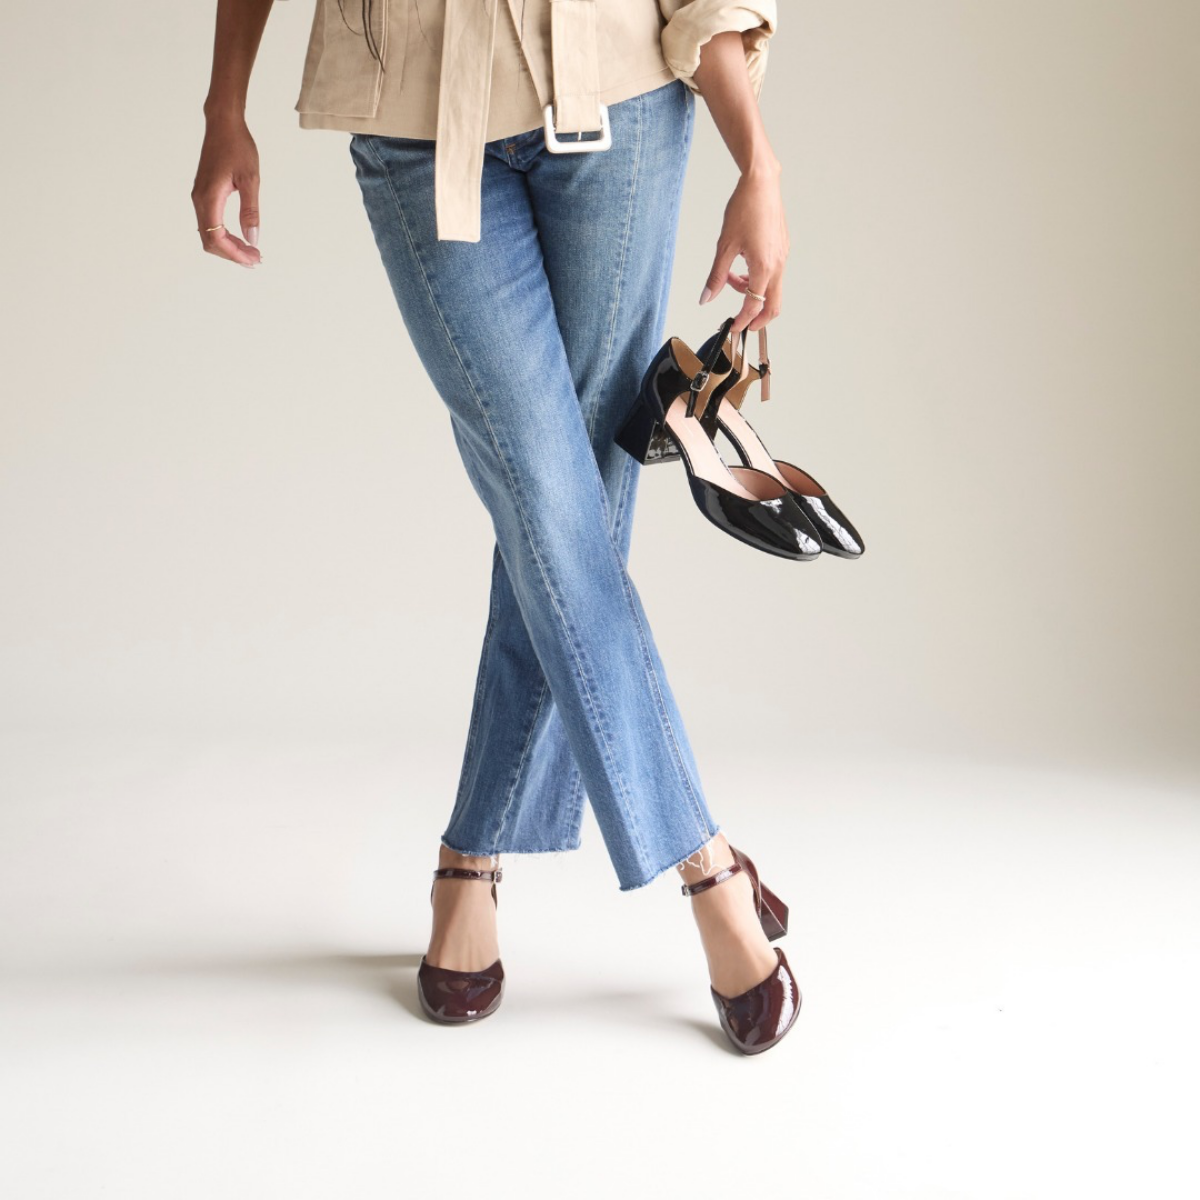 wide jeans with mary jane pumps